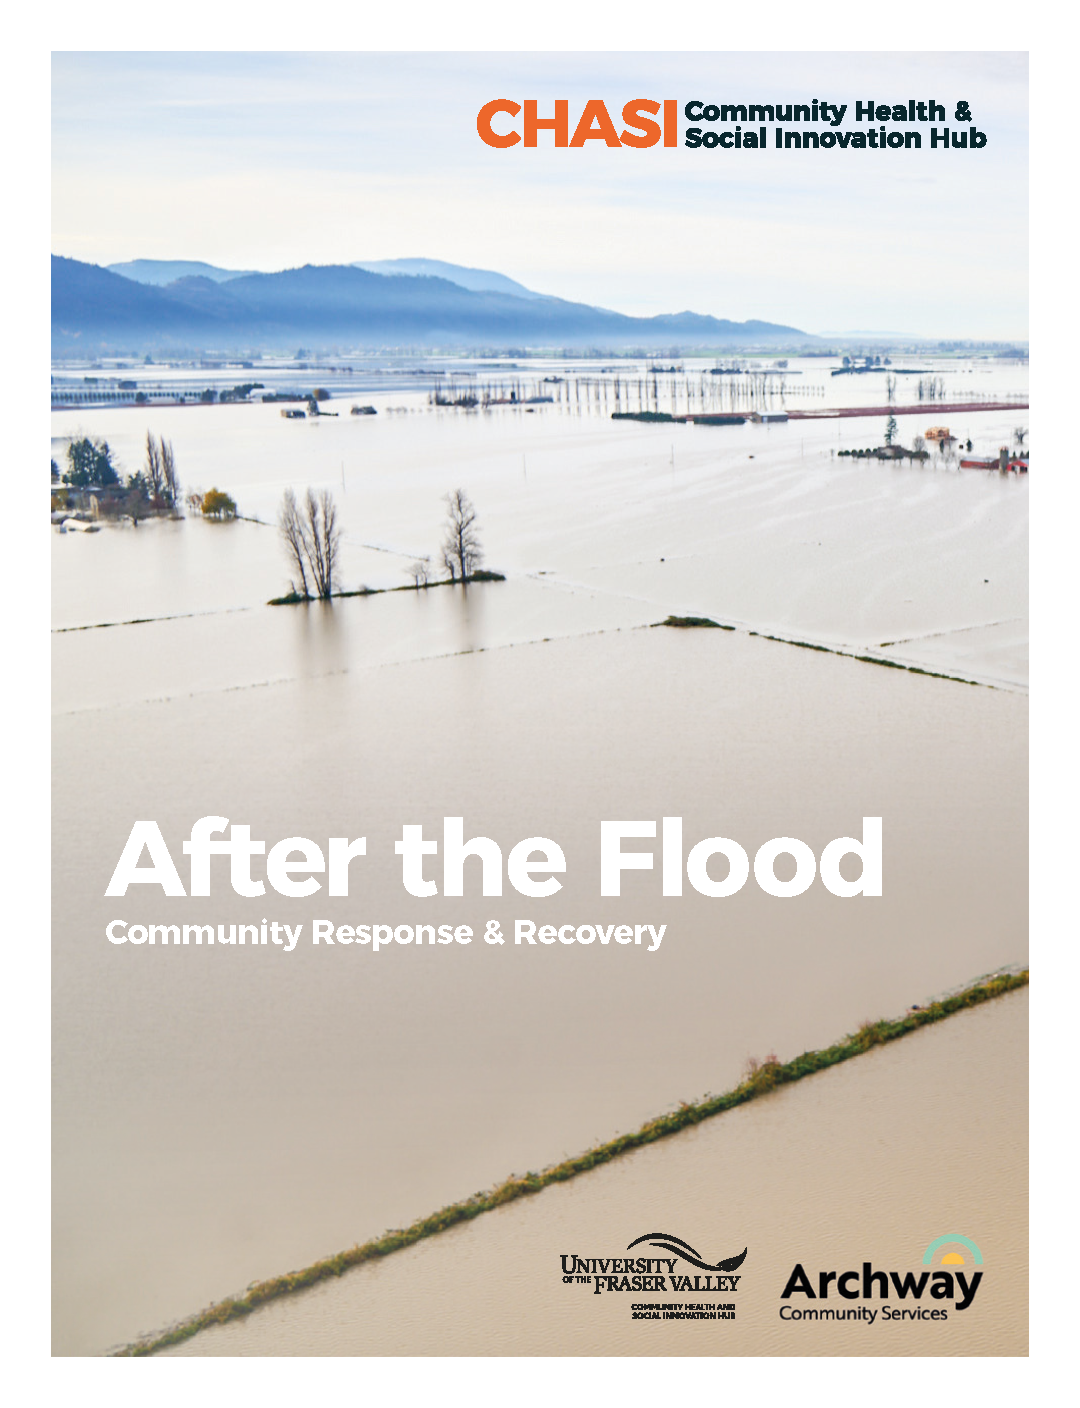 Cover of the report, showing an aerial photo of the 2021 flooding in Abbotsford.